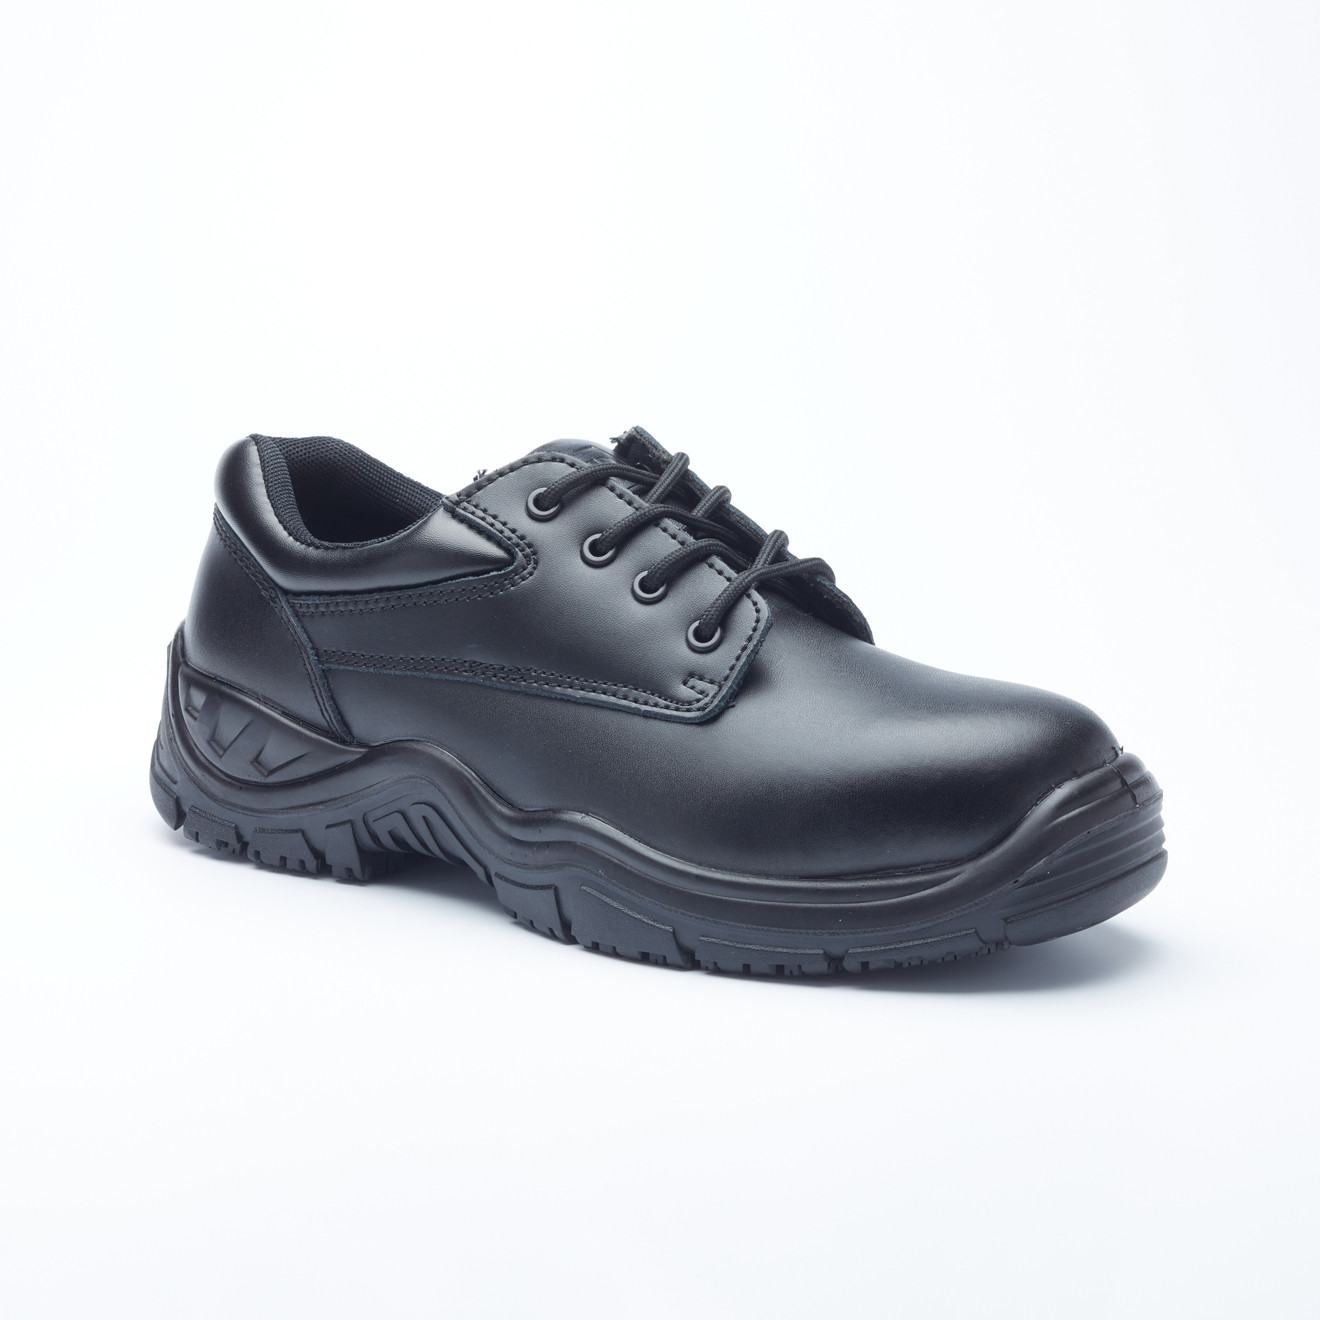 Tactical Officer Shoe